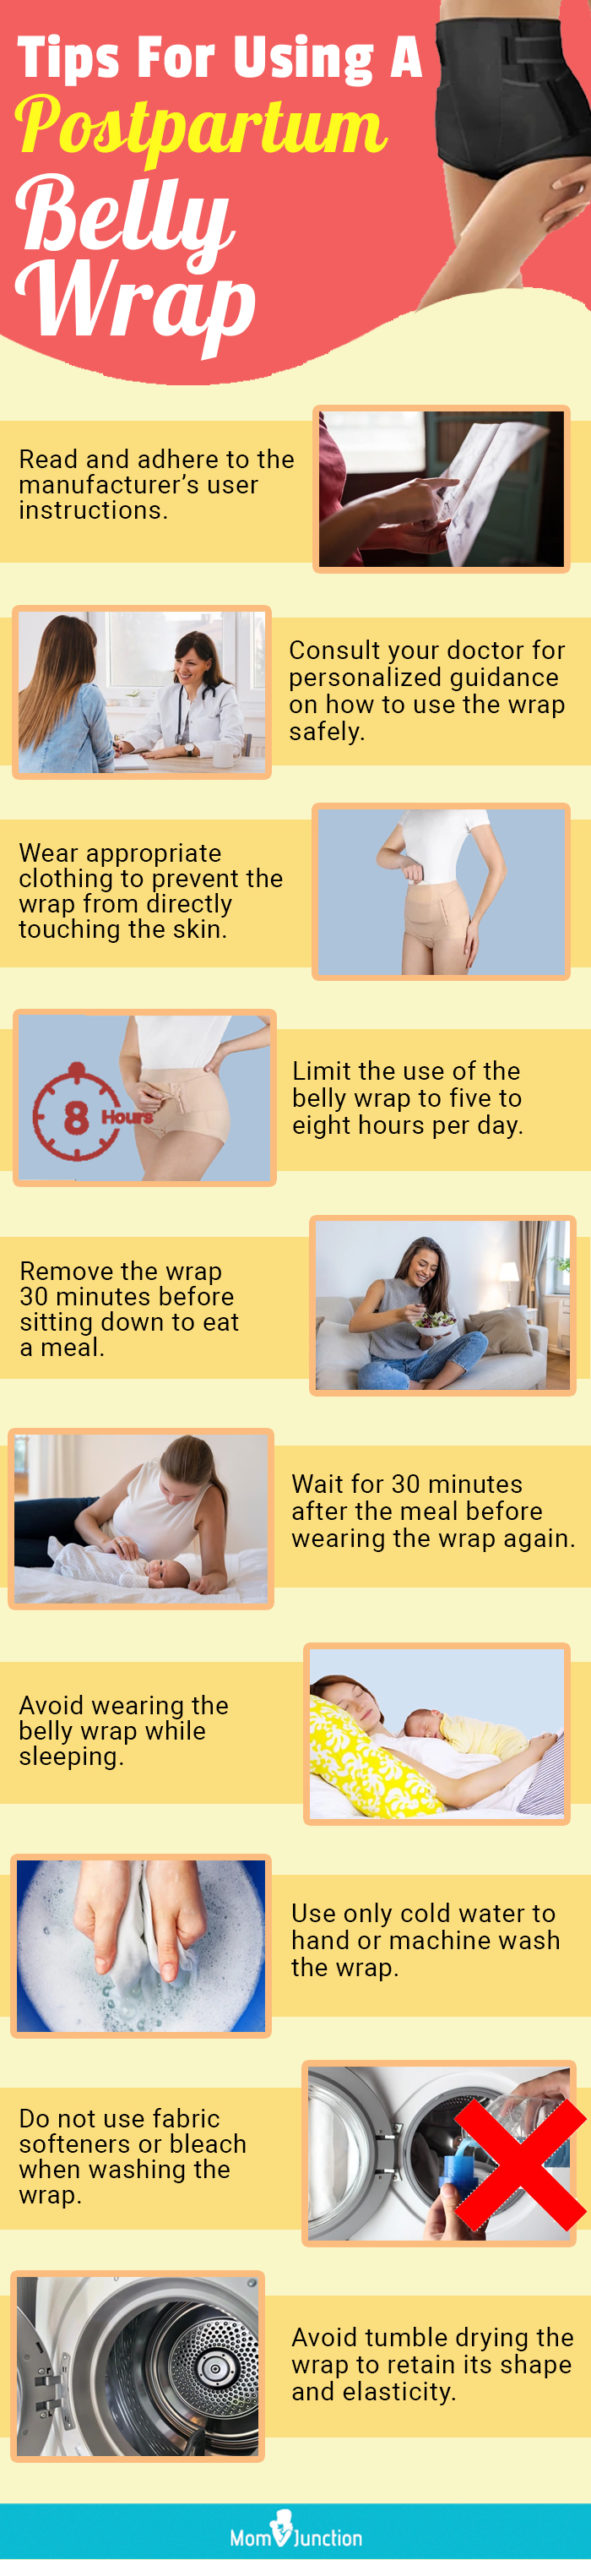  Tips For Using A Postpartum Belly Wrap (infographic)